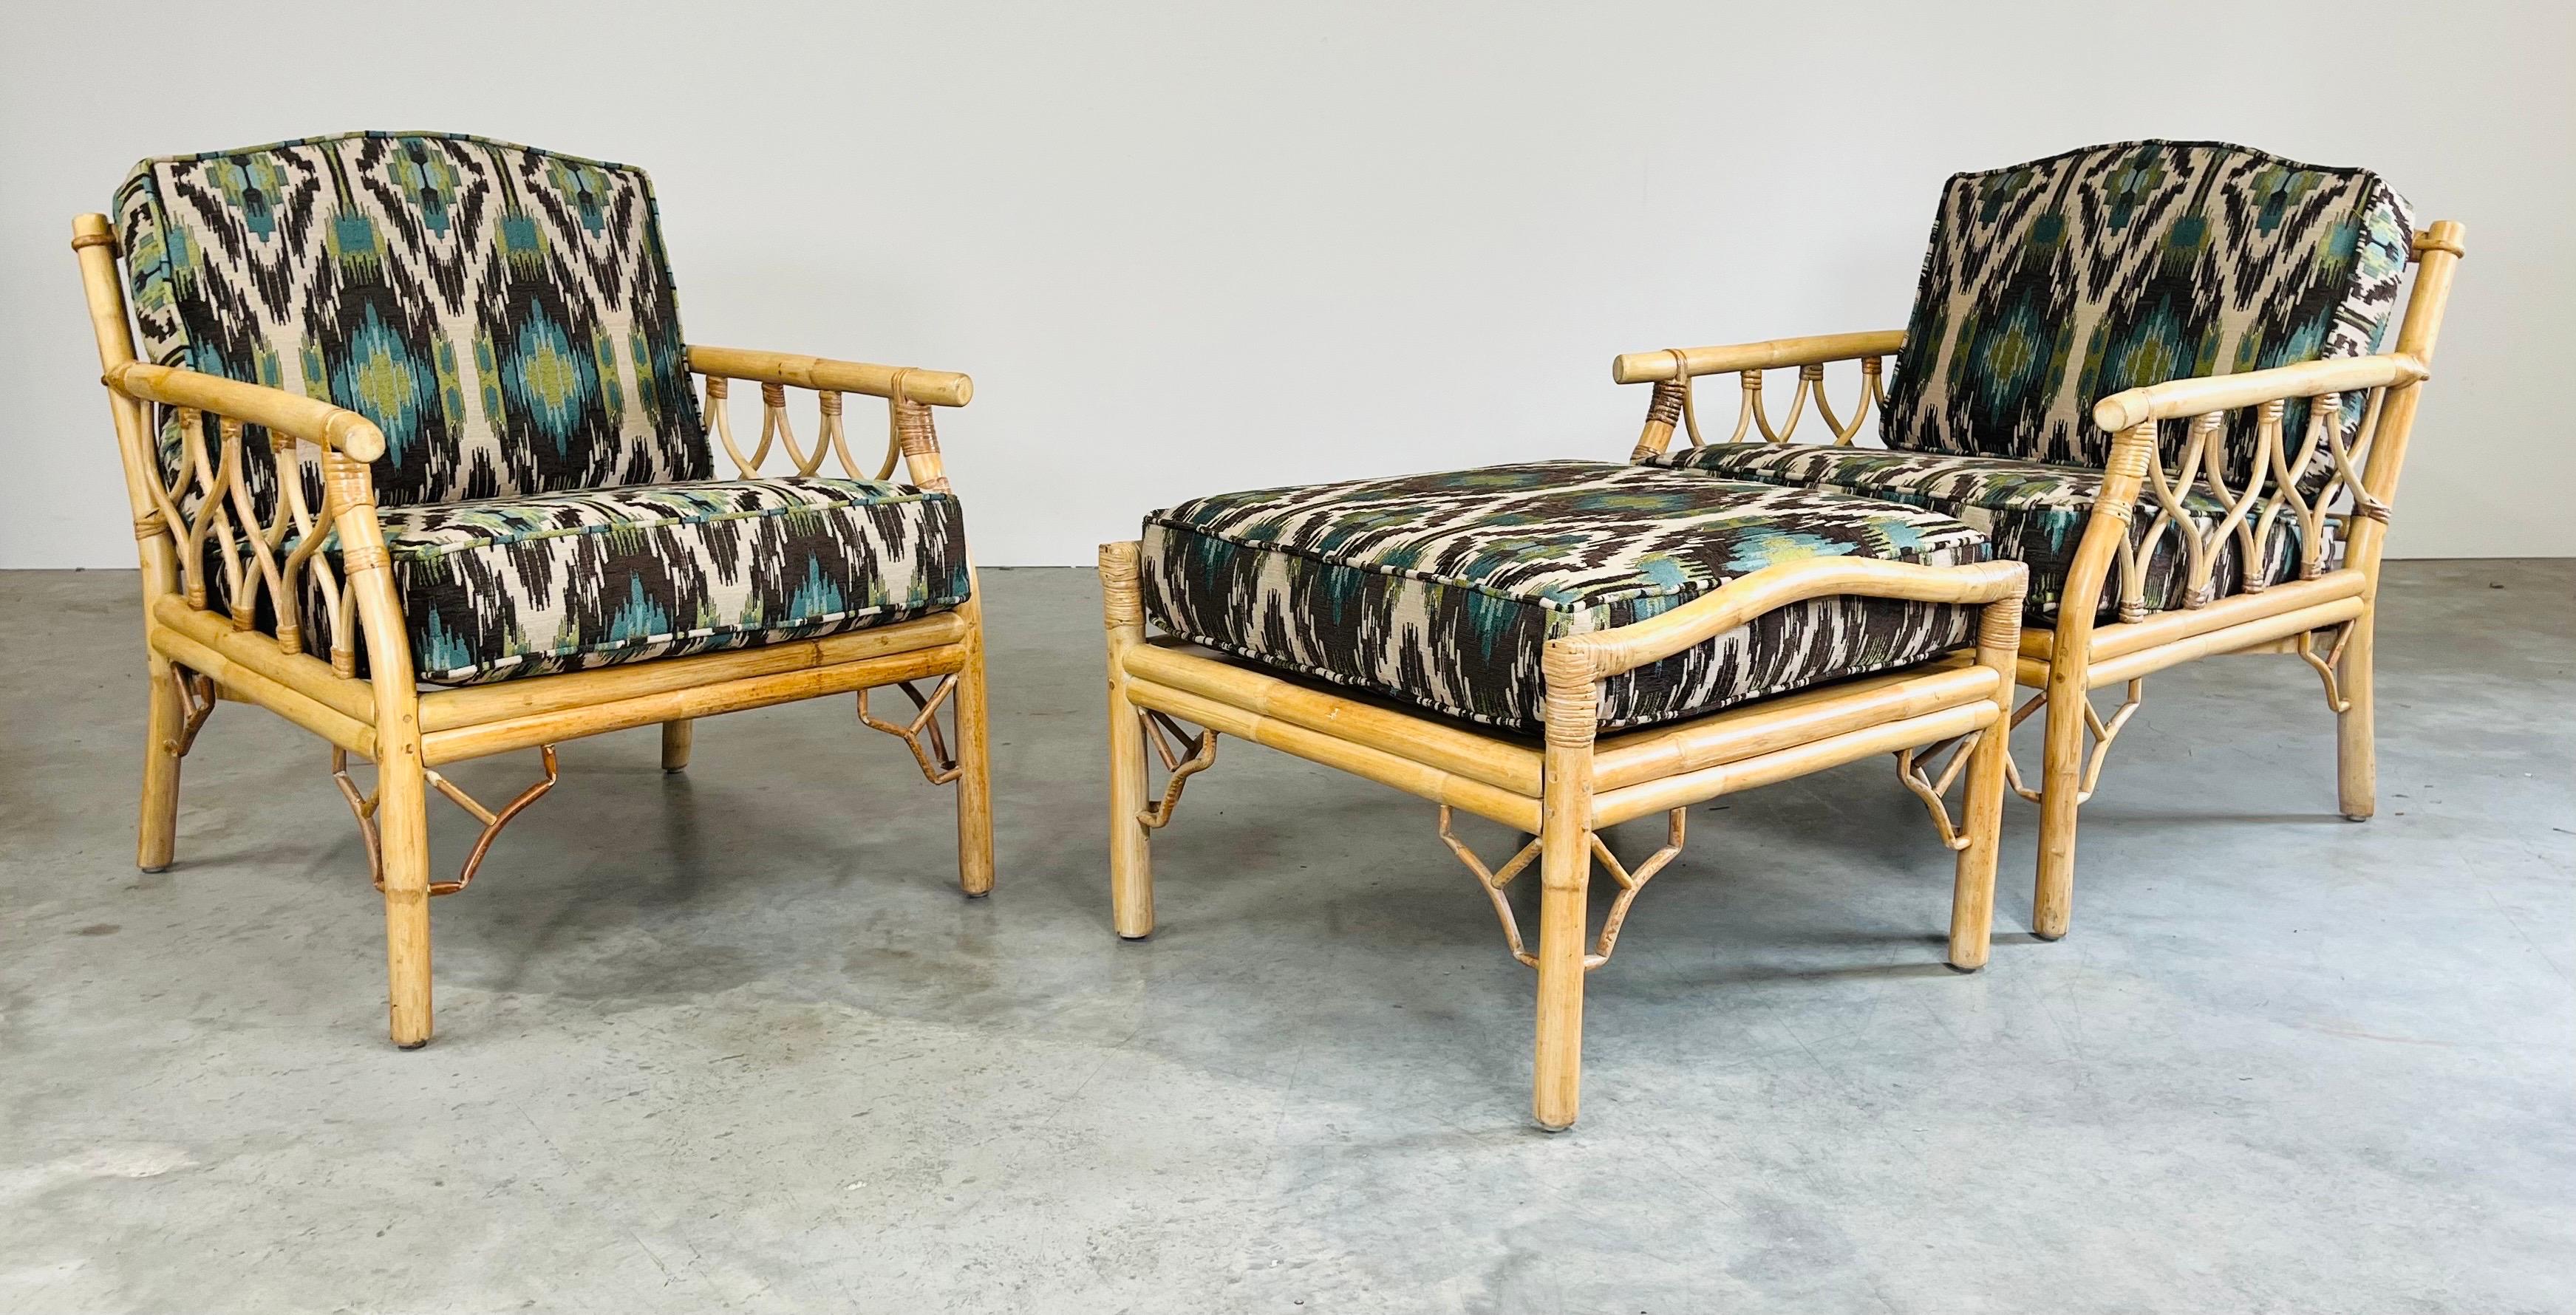 Mid 20th c. Chinese Chippendale Bamboo Rattan Lounge Chairs & Matching Ottoman In Excellent Condition For Sale In Southampton, NJ